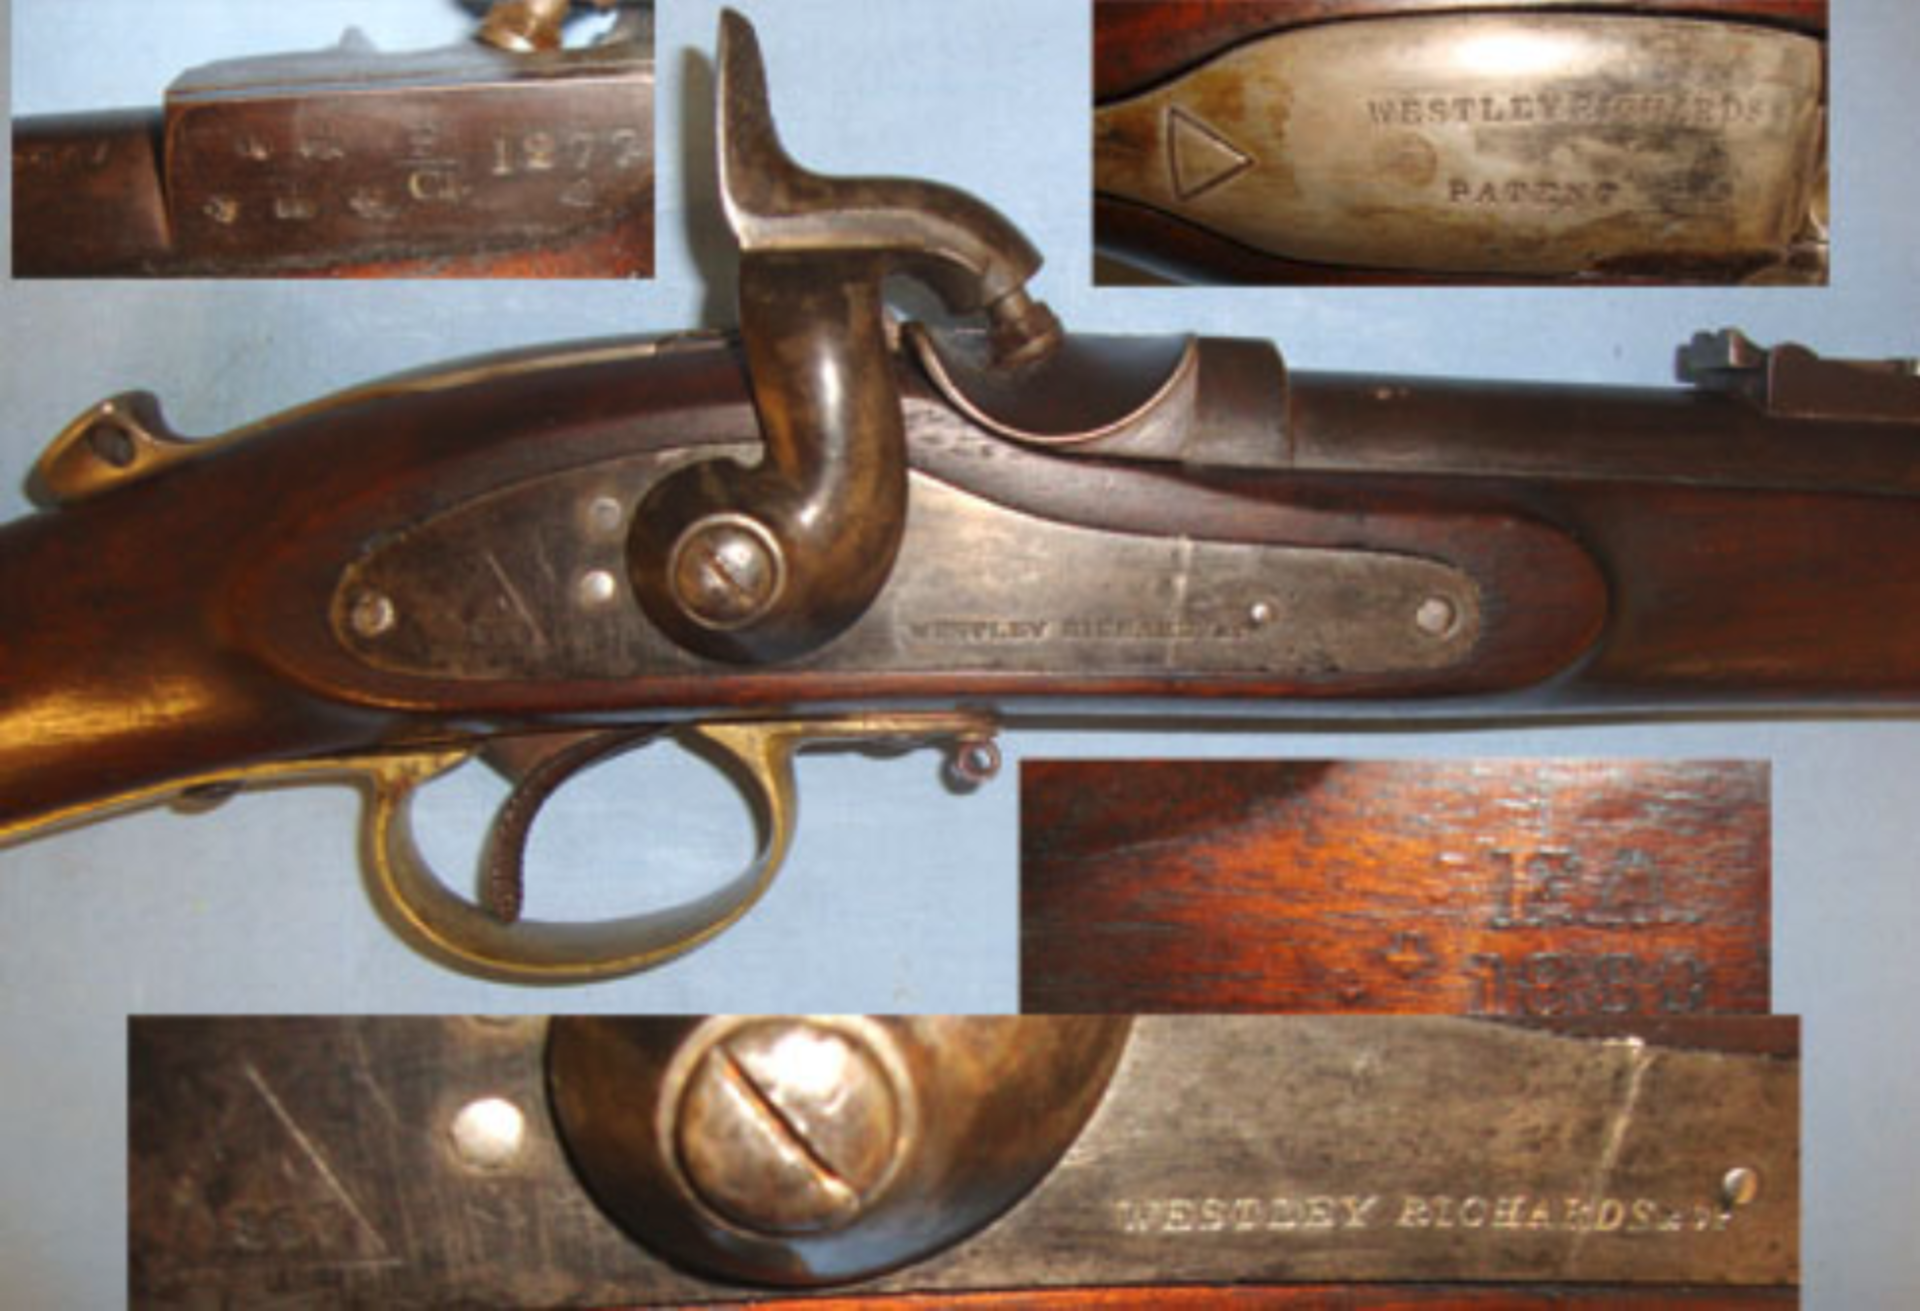 ONE OF 2000 PRODUCED, 1867 Portuguese Contract Westley Richards & Co Whitworth Patent Carbine - Image 3 of 3